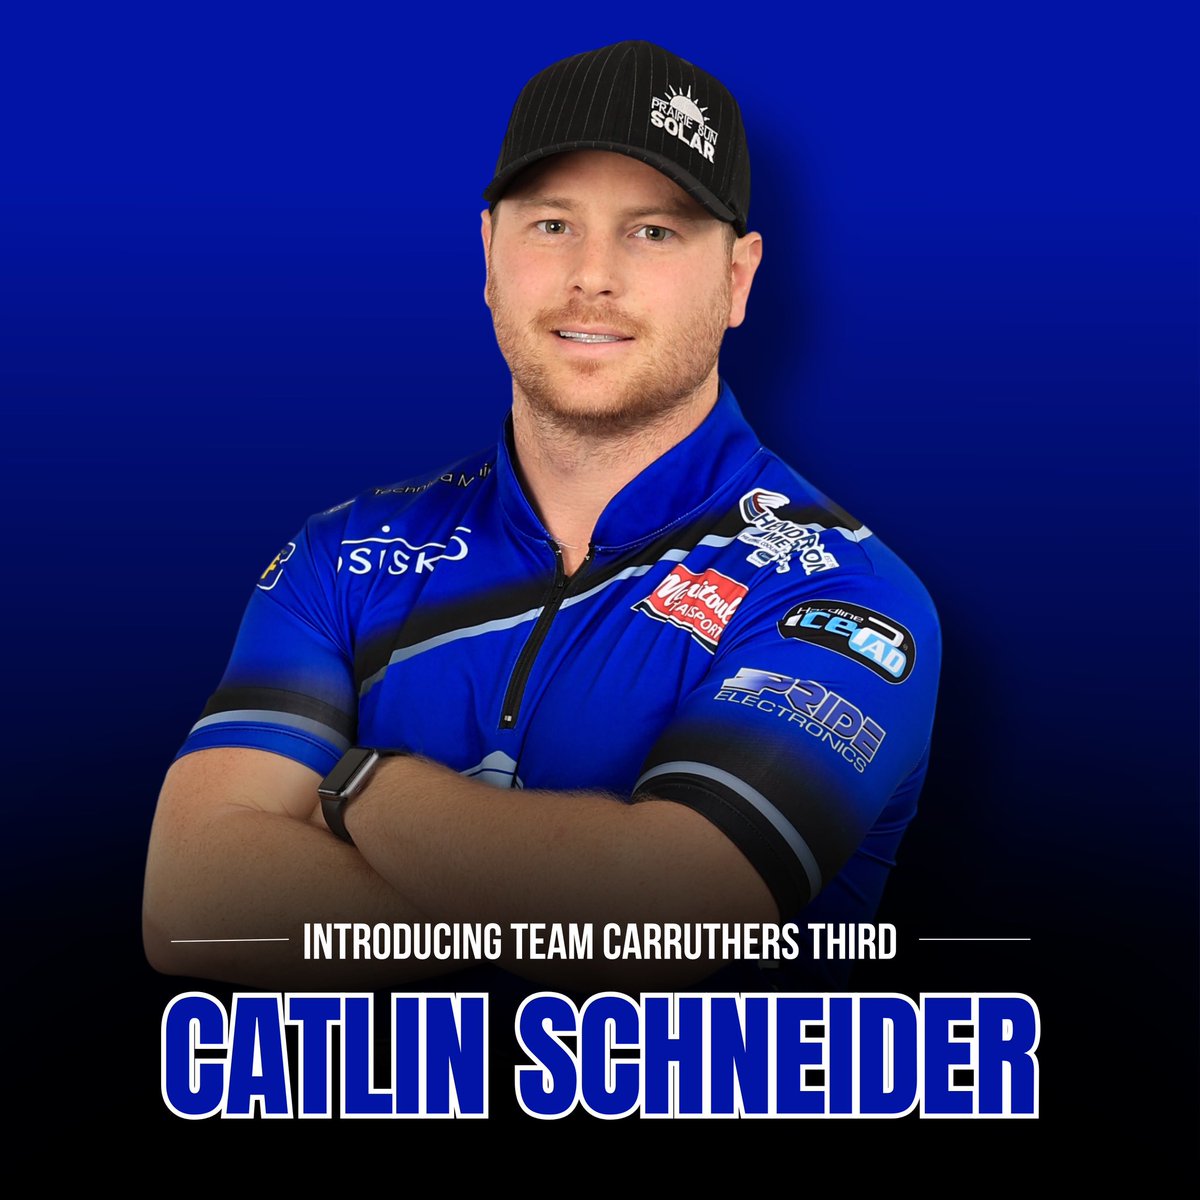 TEAM ANNOUNCEMENT 📣 Team Carruthers is incredibly excited to announce Catlin Schneider is joining the team at the third position. [1/2]